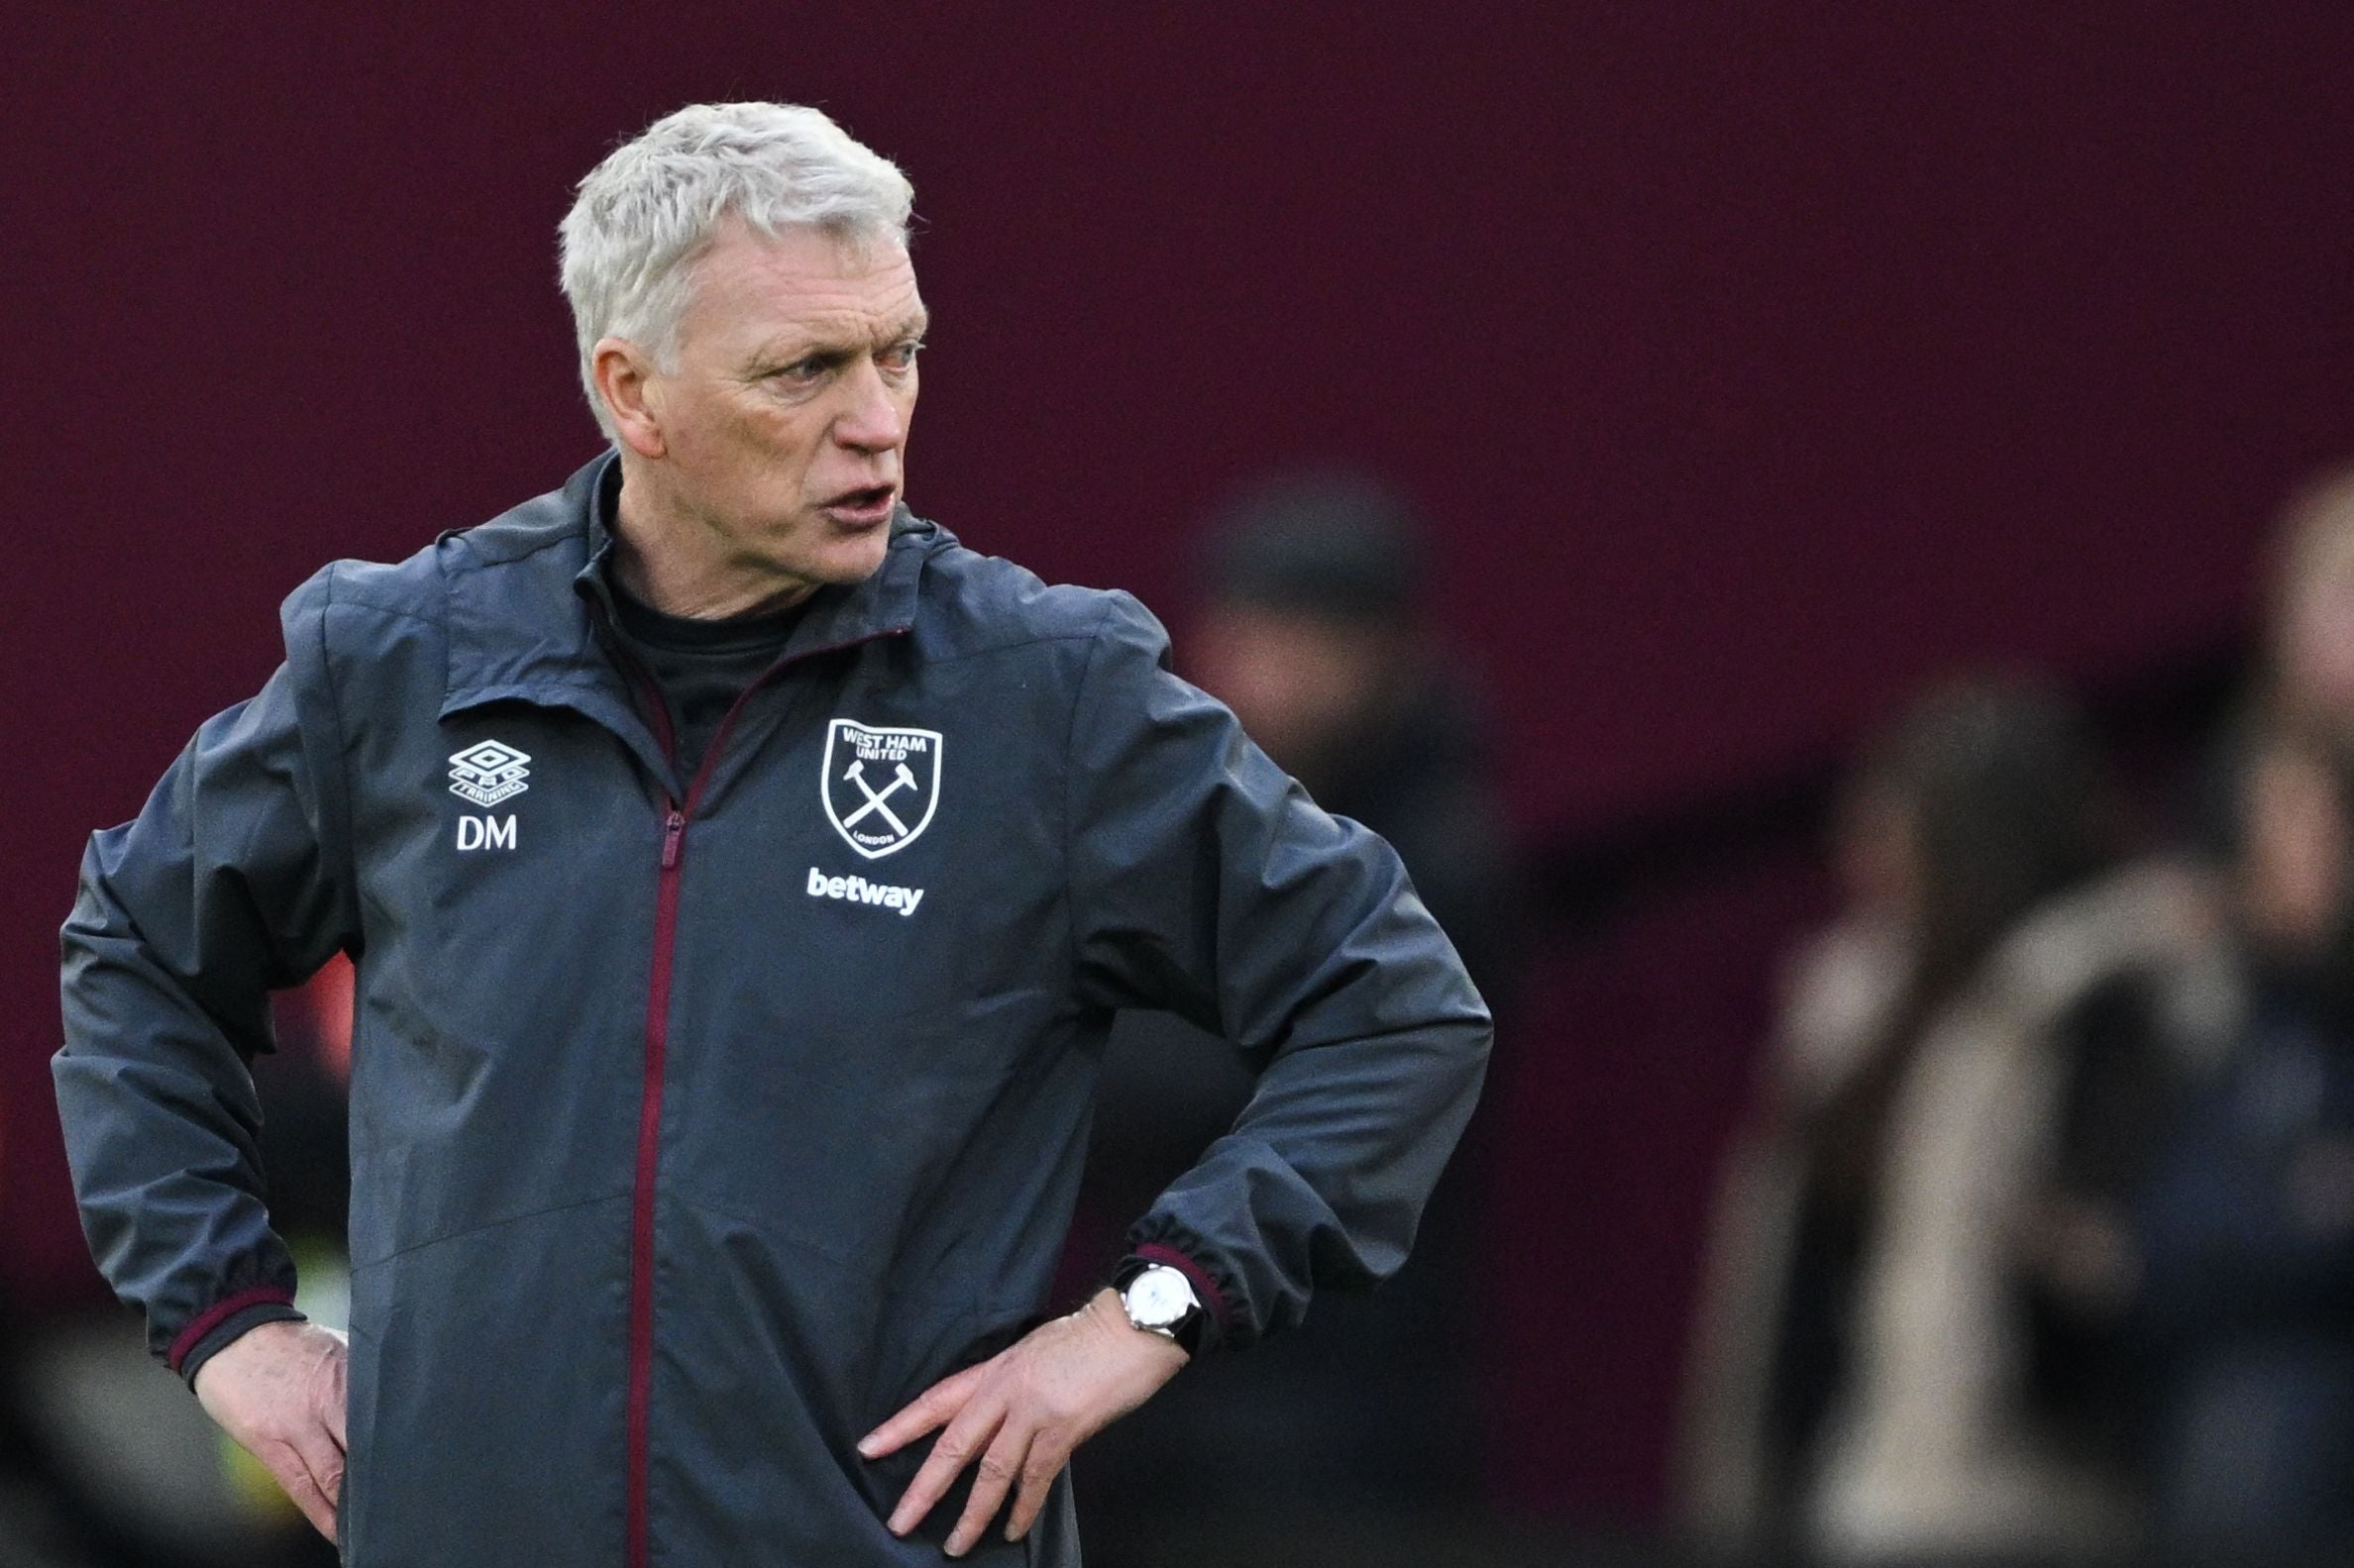 divin mubama approaching pivotal period at west ham as attacking worries mount for david moyes